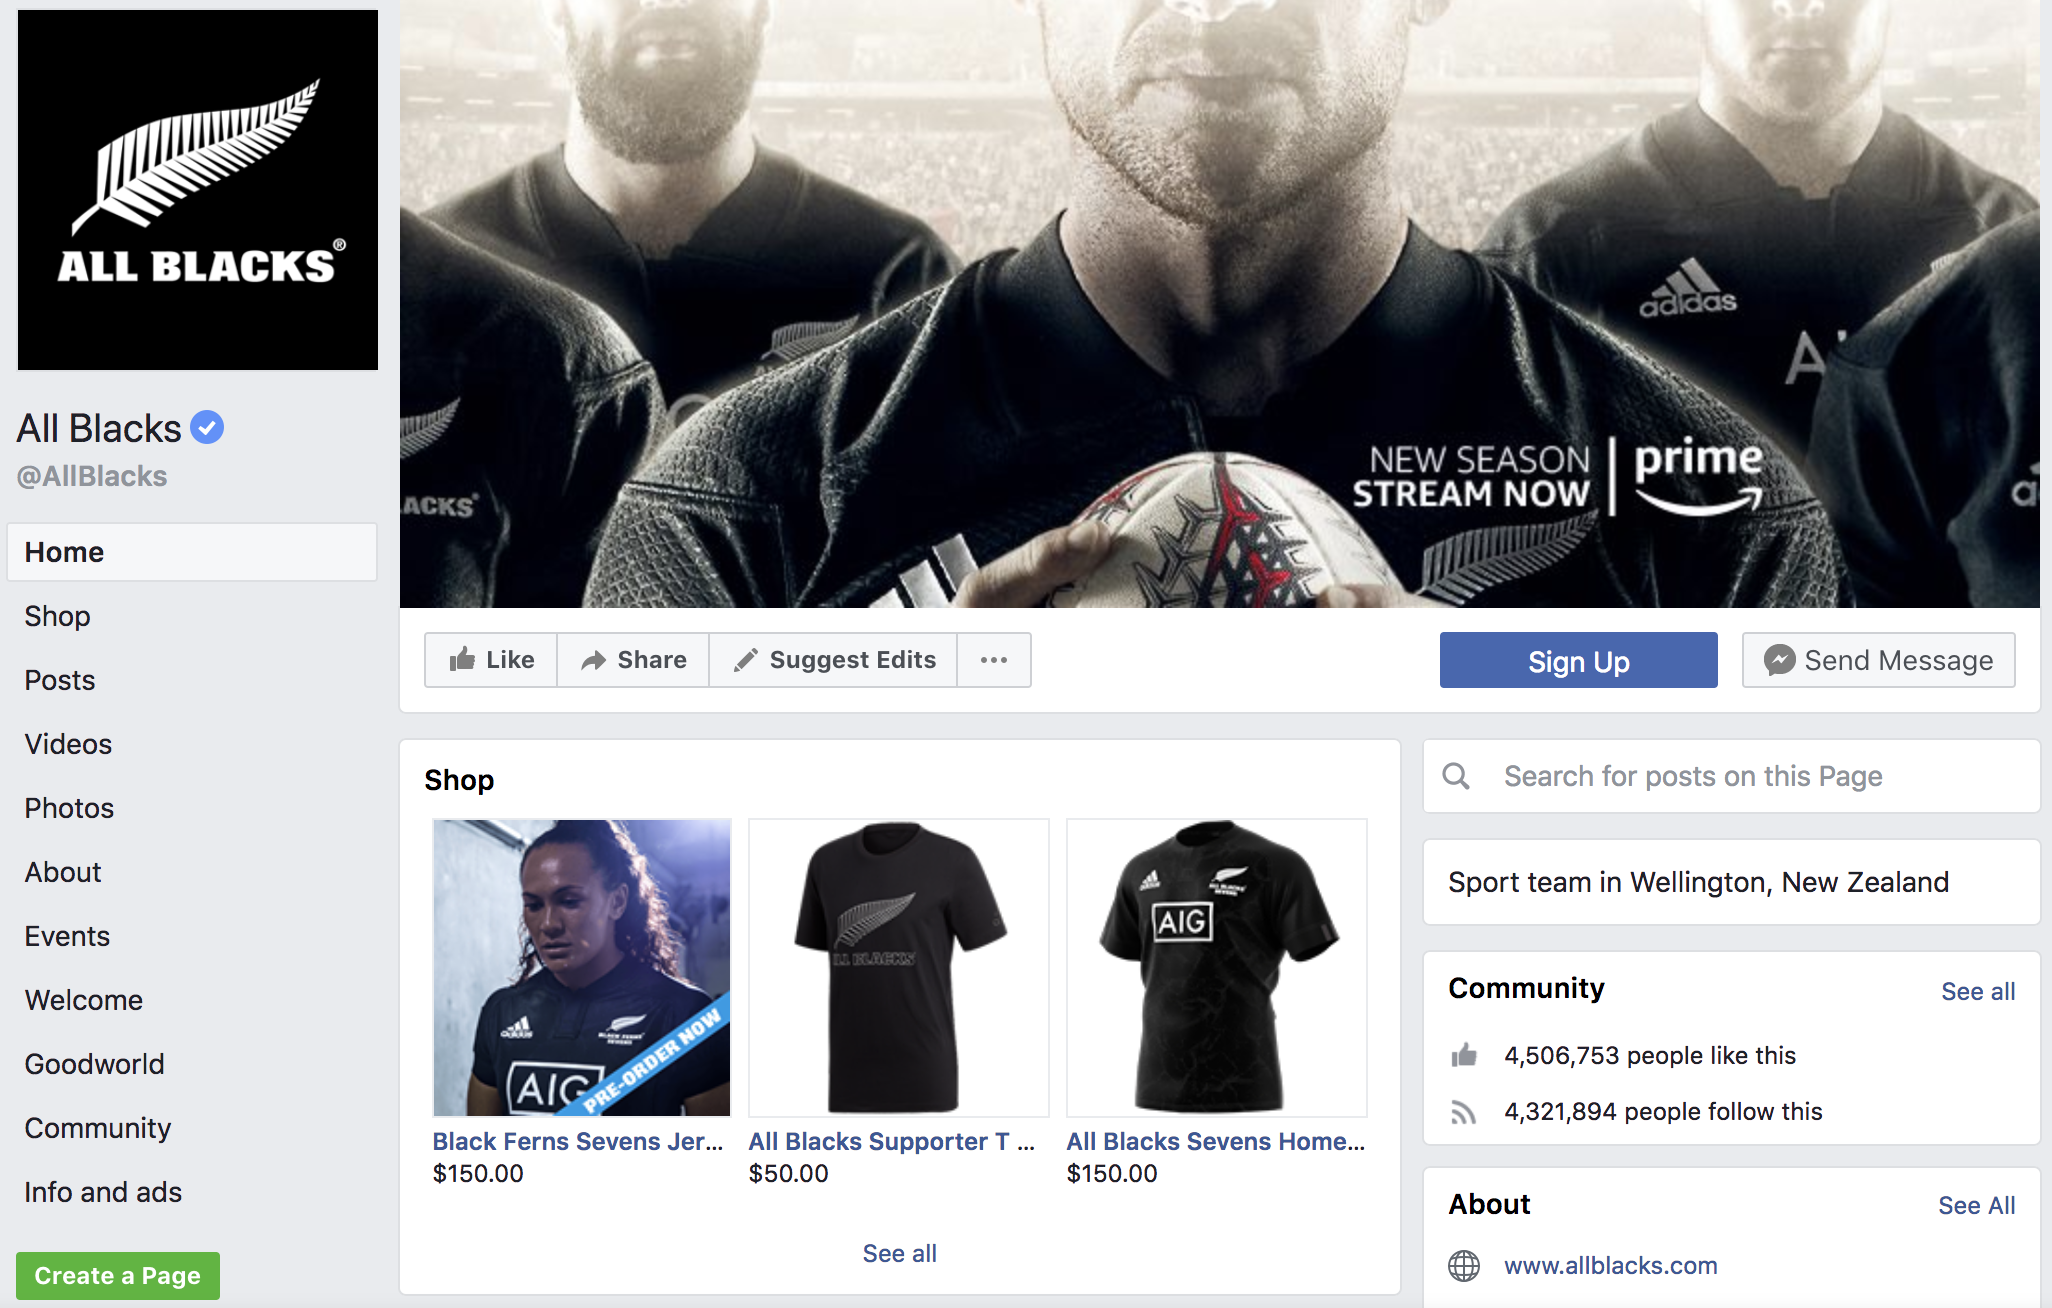 The Facebook for WooCommerce extension pulls products from WooCommerce onto the official All Blacks Facebook page.